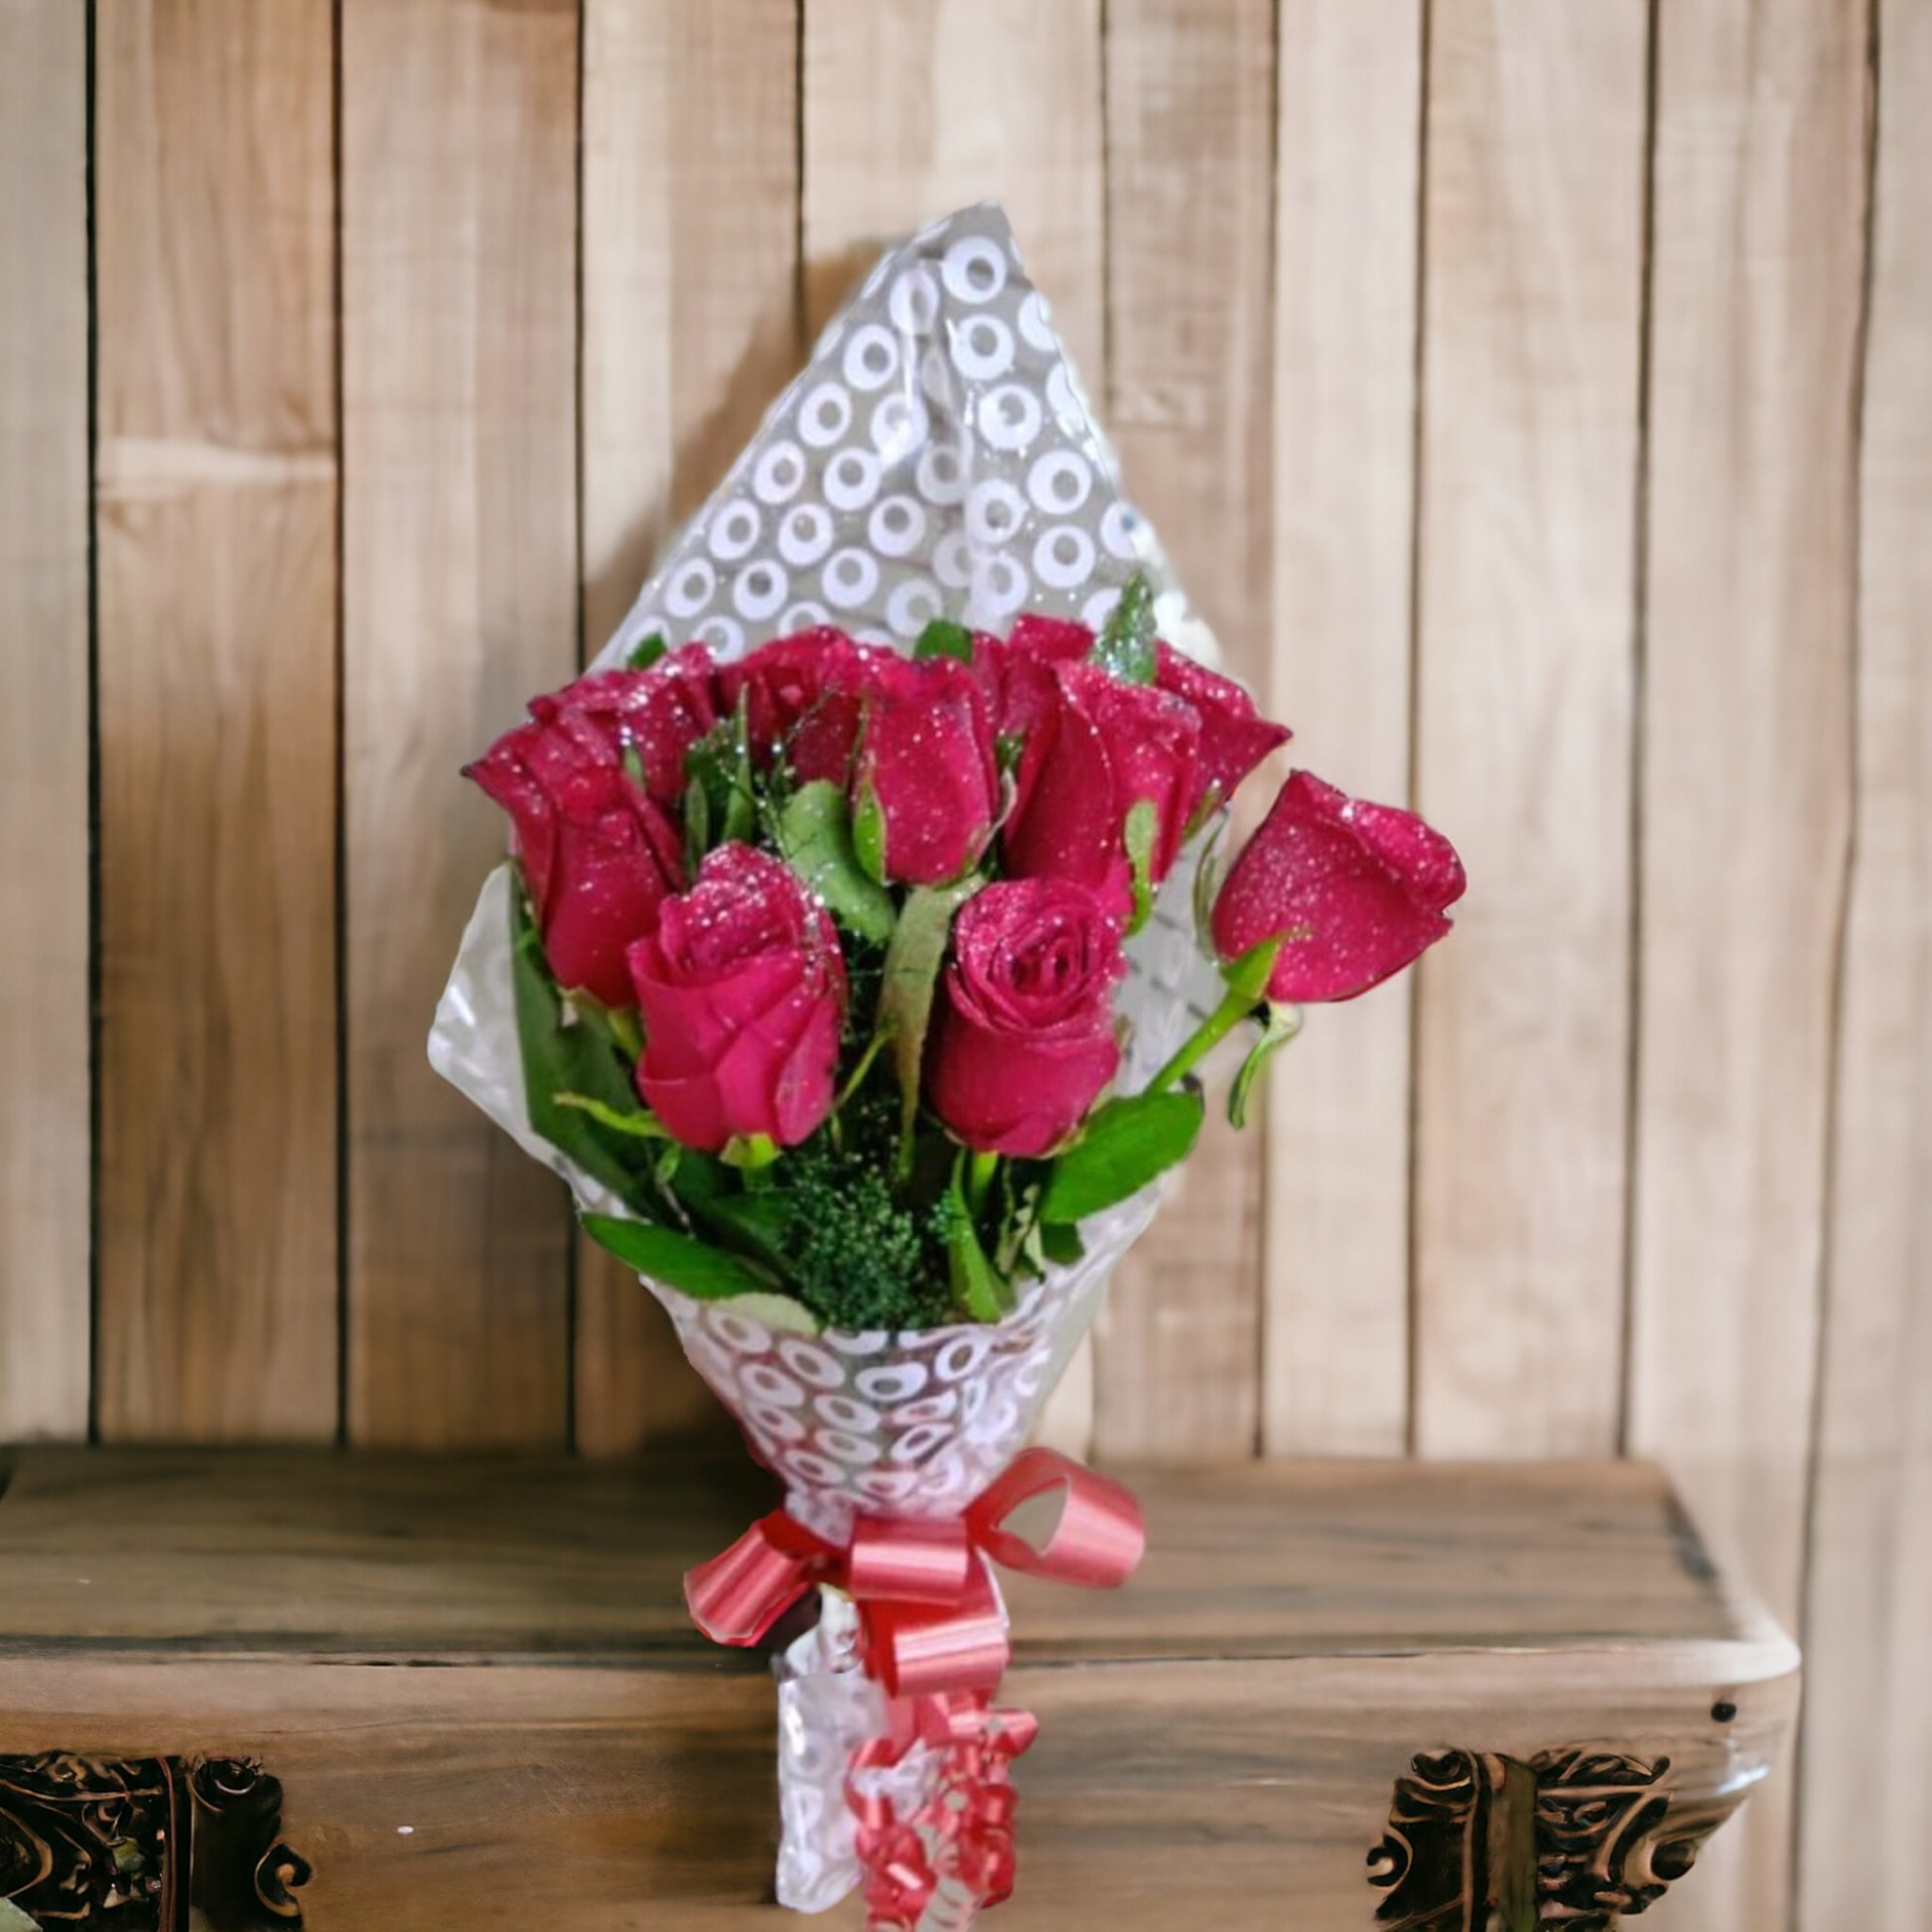 Buy or Send New Year Bouquets by Bakers Wagon